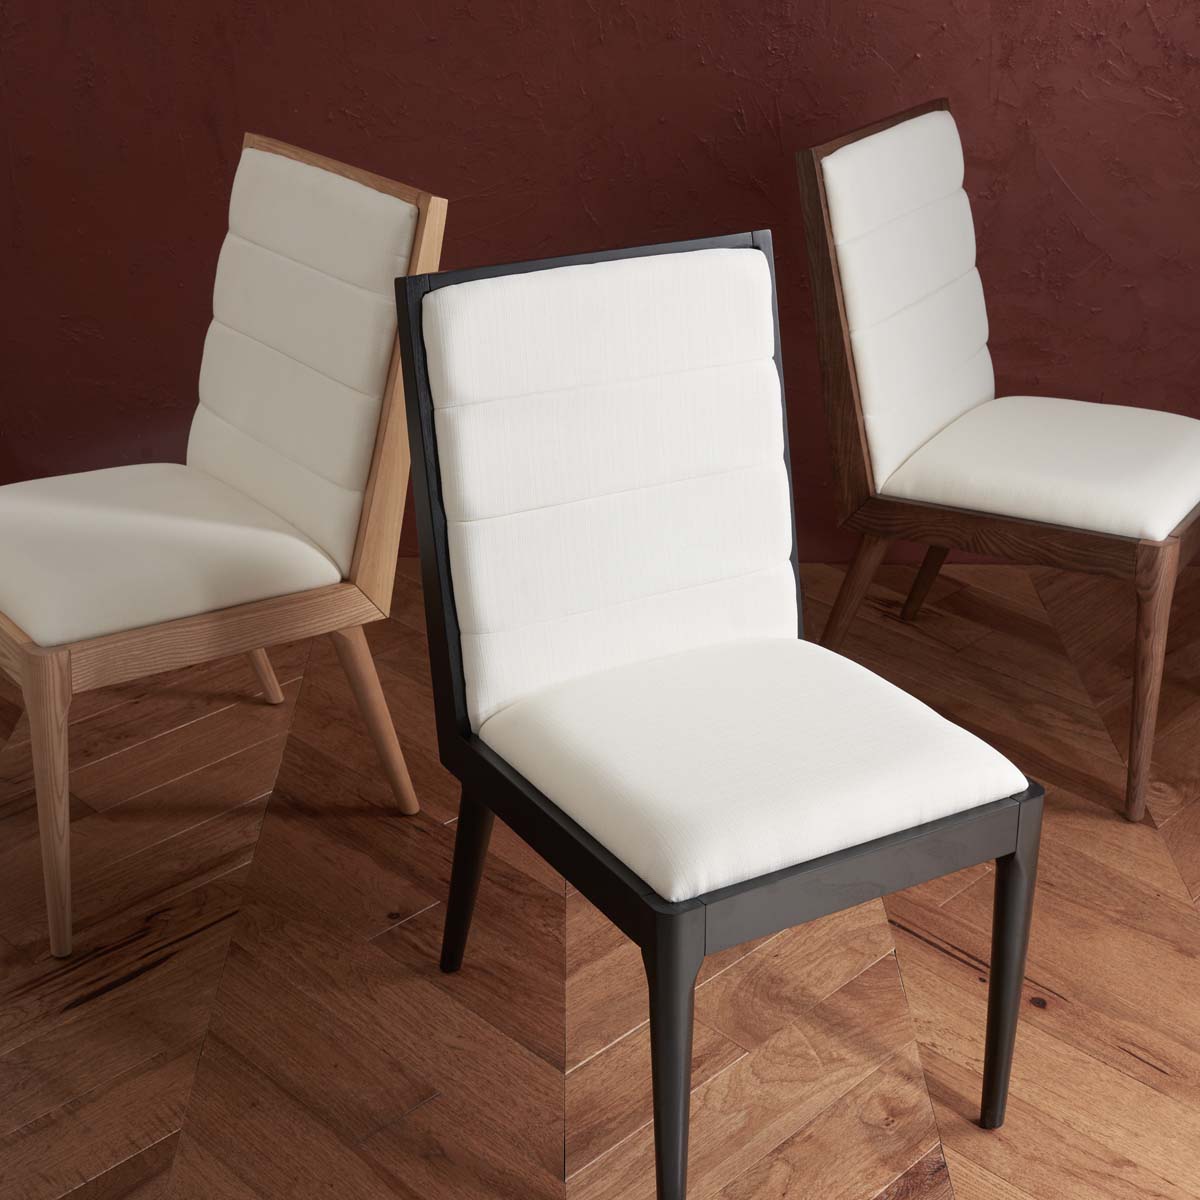 Safavieh Couture Laycee Dining Chair